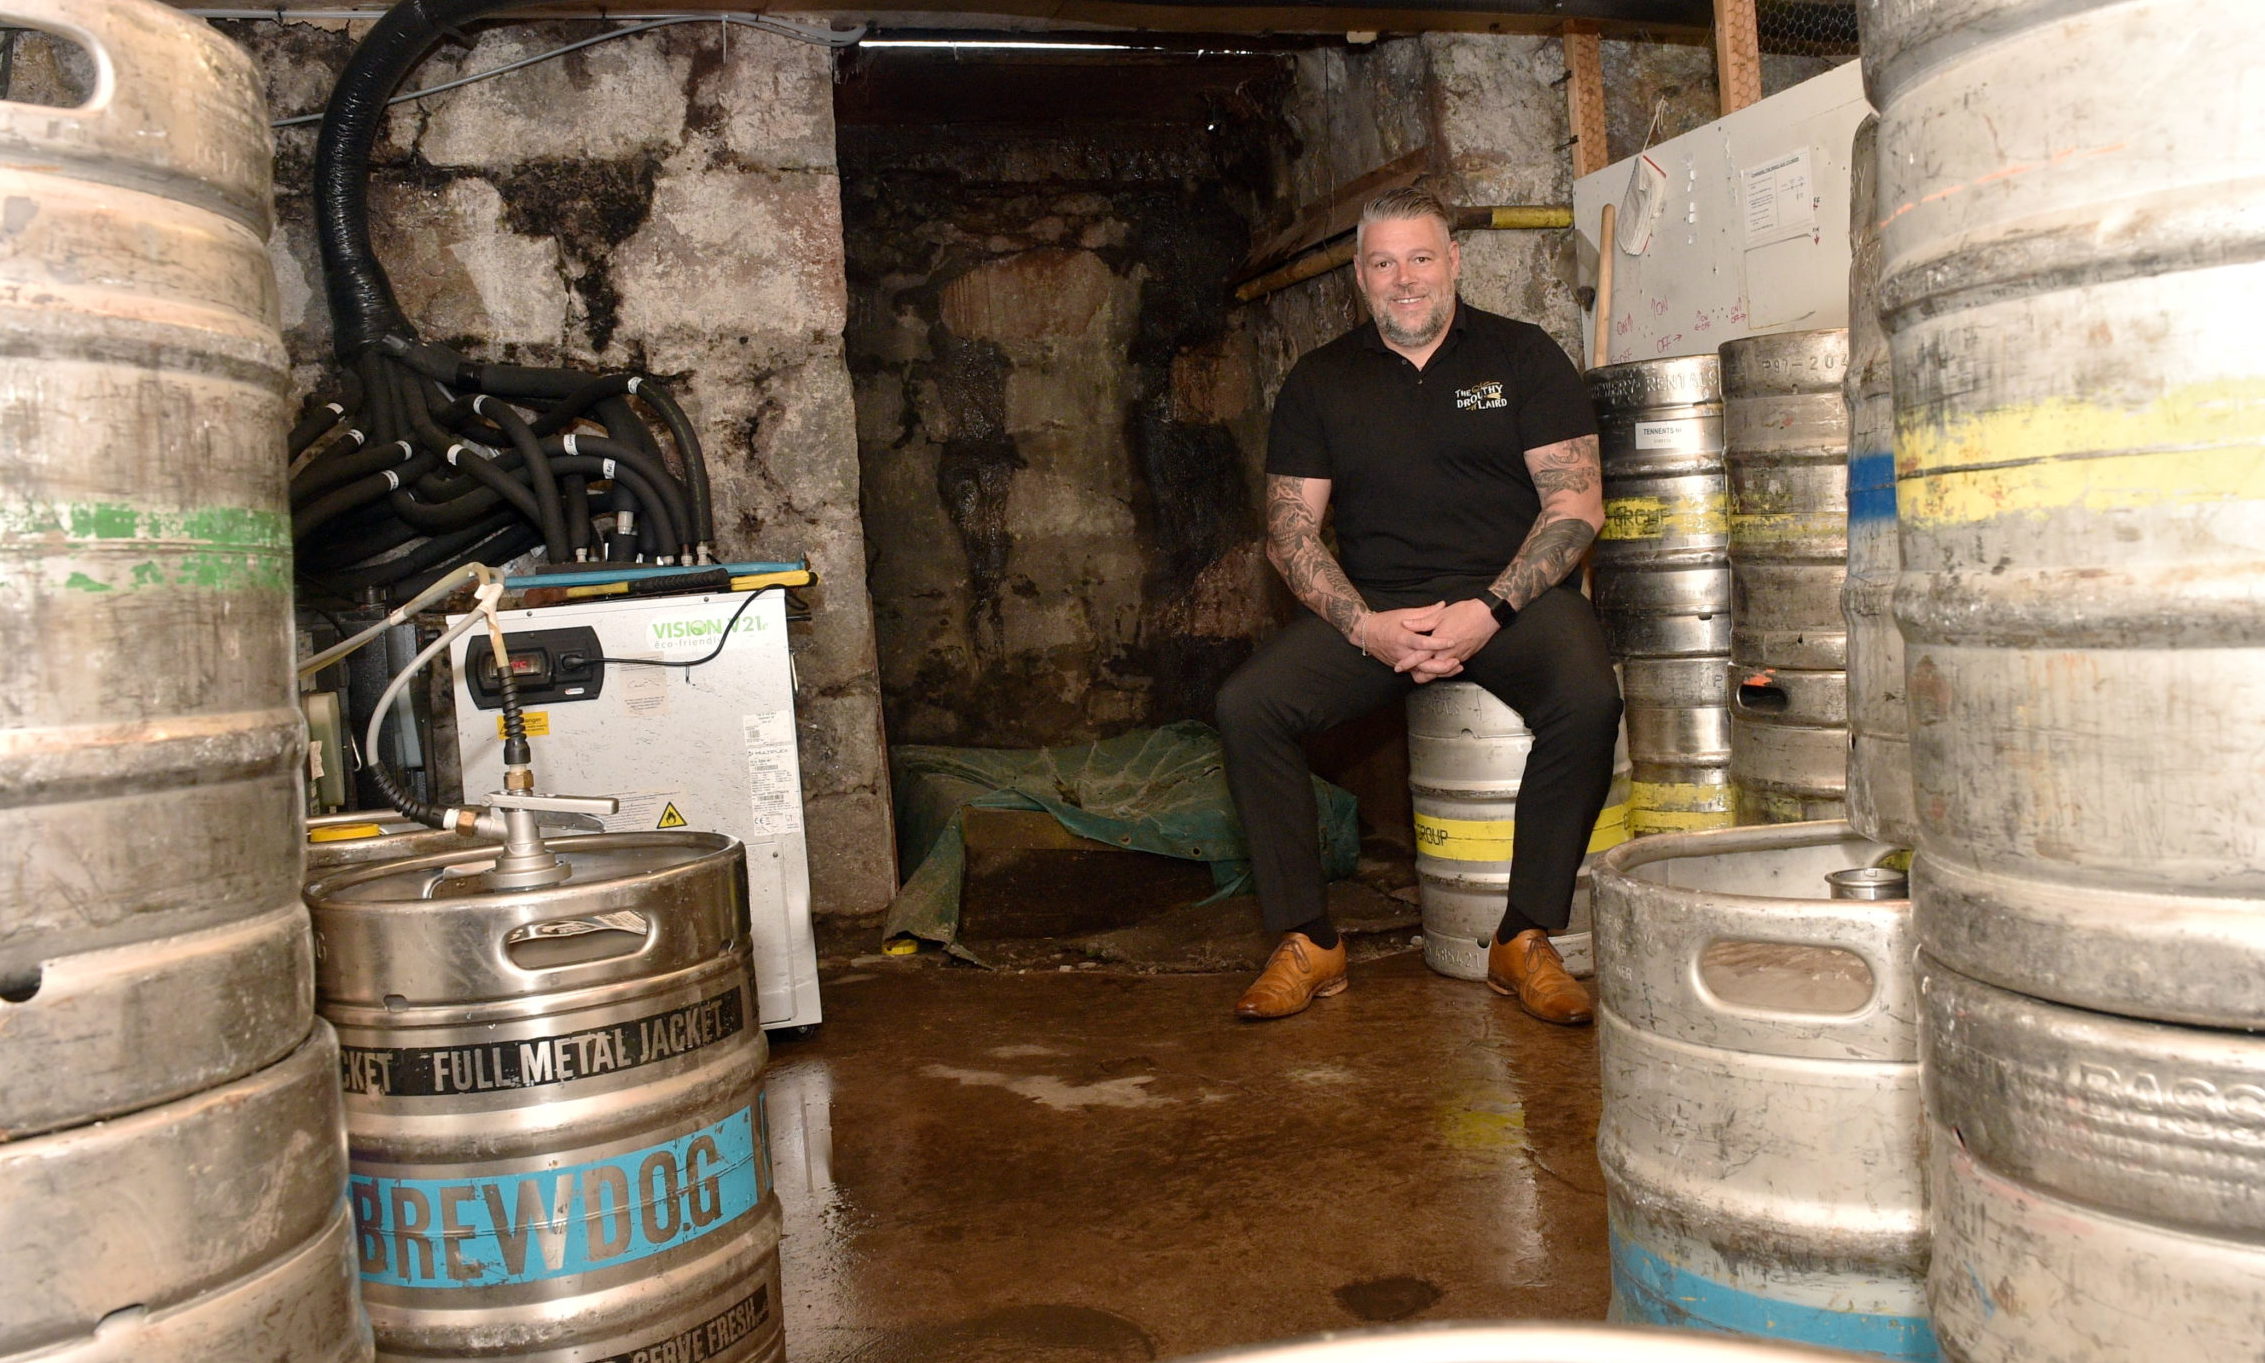 Laird Parker in the cellar of The Drouthy Laird, Inverurie.